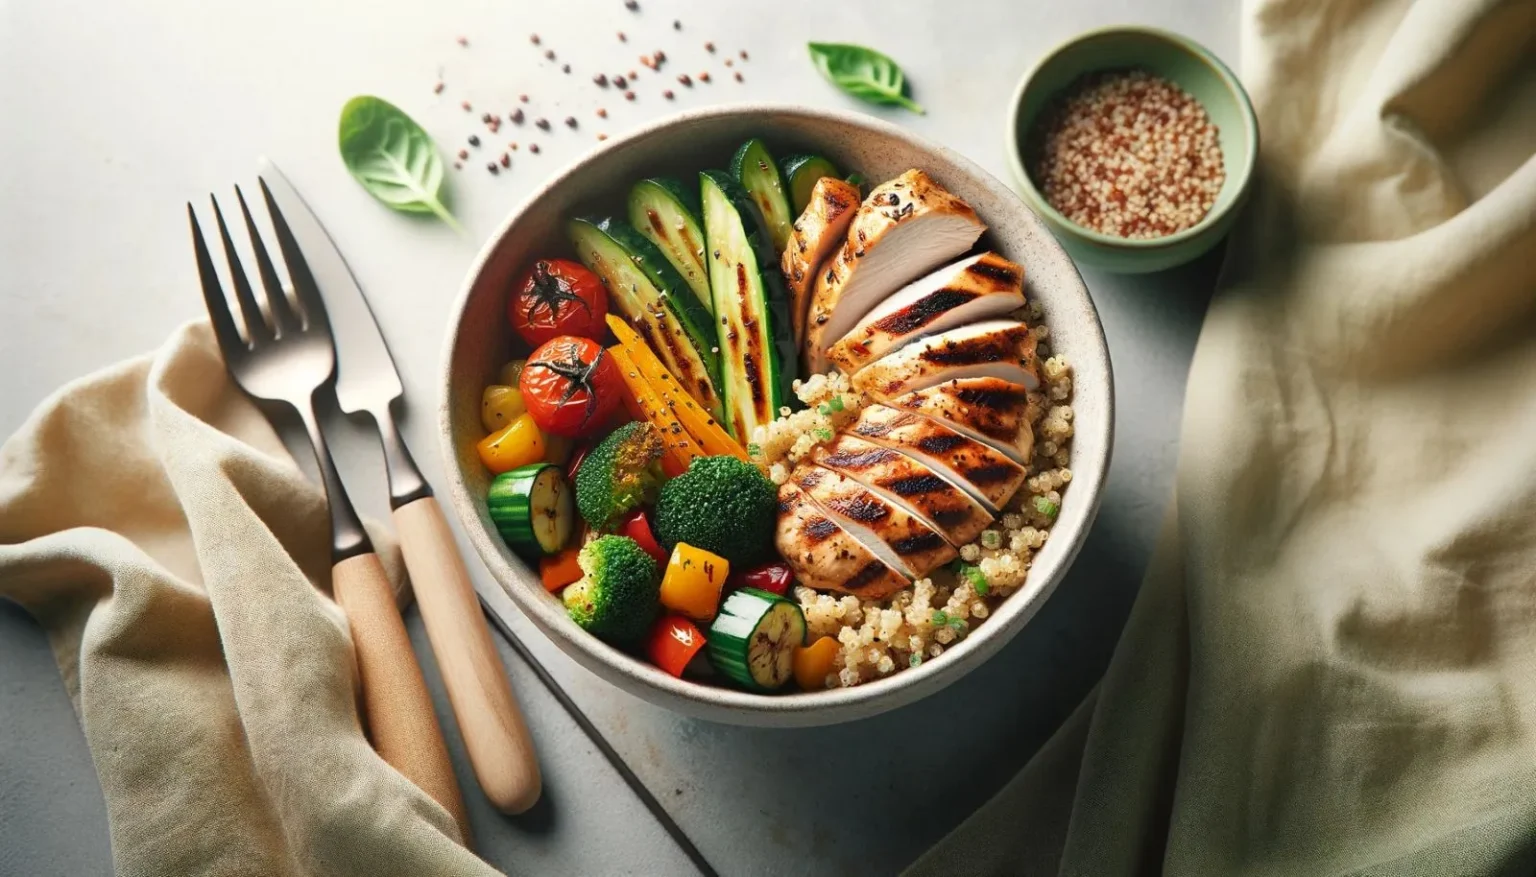 Healthy homemade fast food bowl with grilled chicken, roasted vegetables, and quinoa on a minimalist background, emphasizing simplicity and nutritious dining at home.